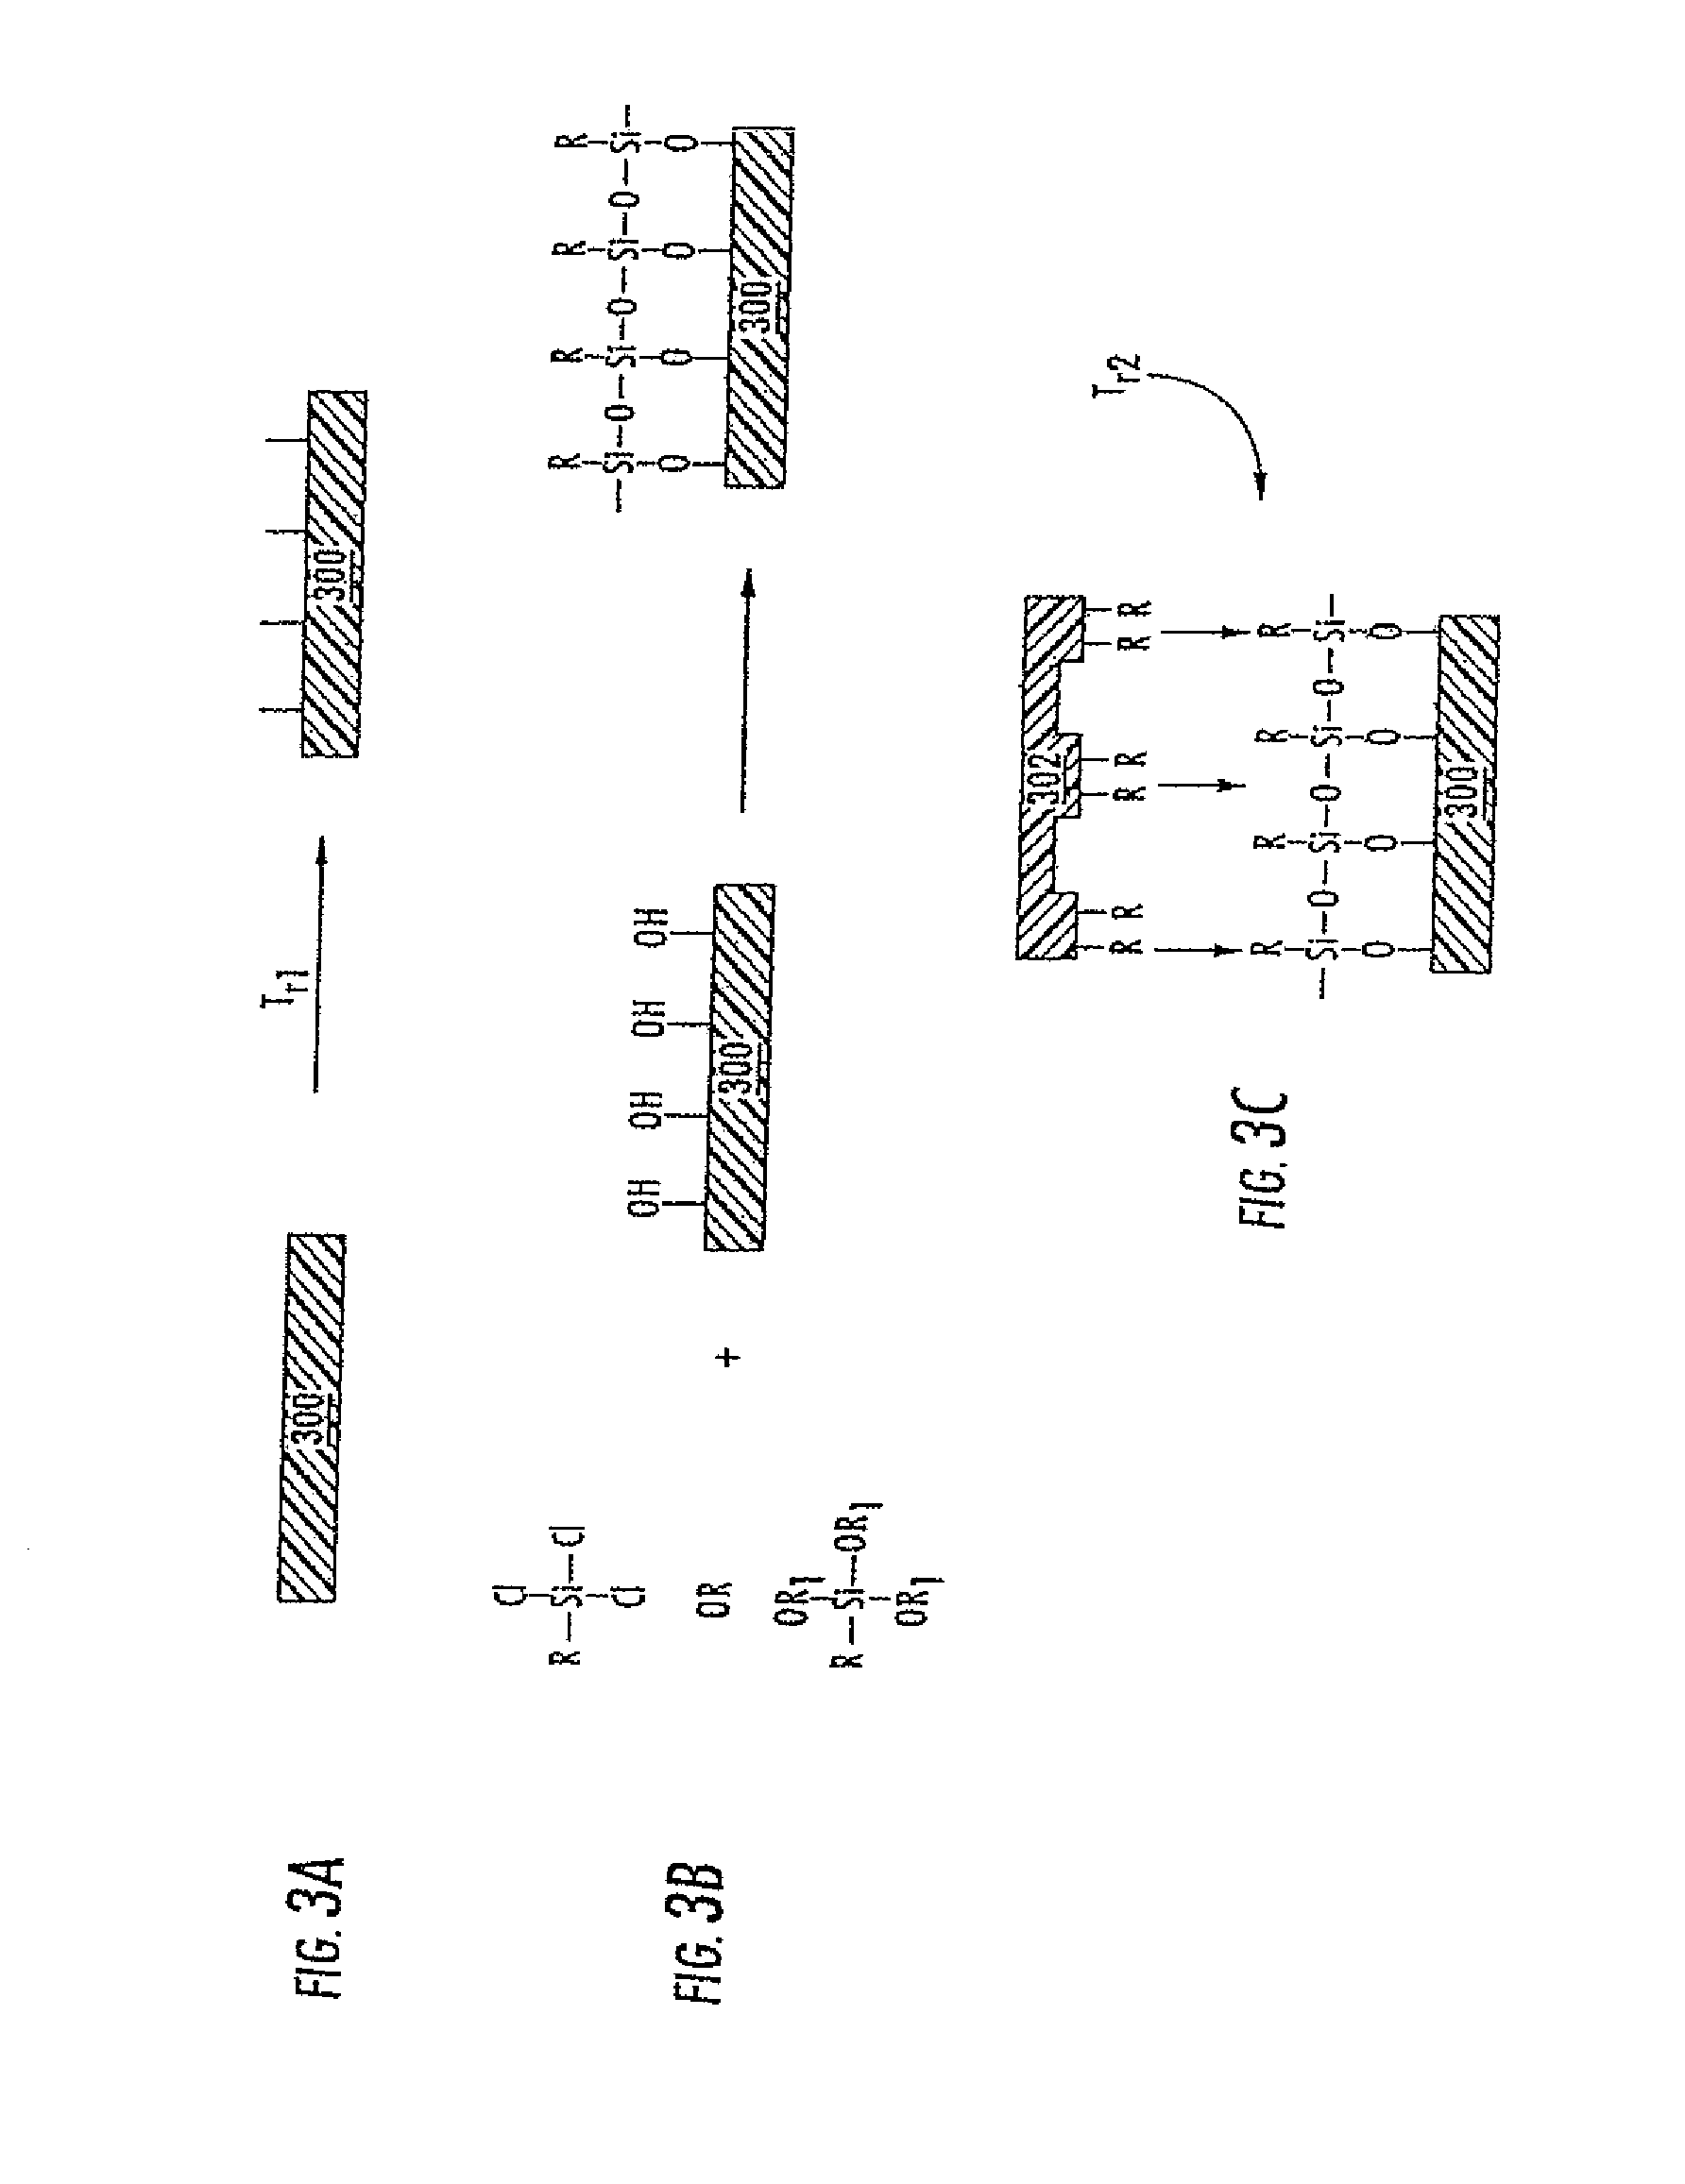 Methods and materials for fabricating microfluidic devices